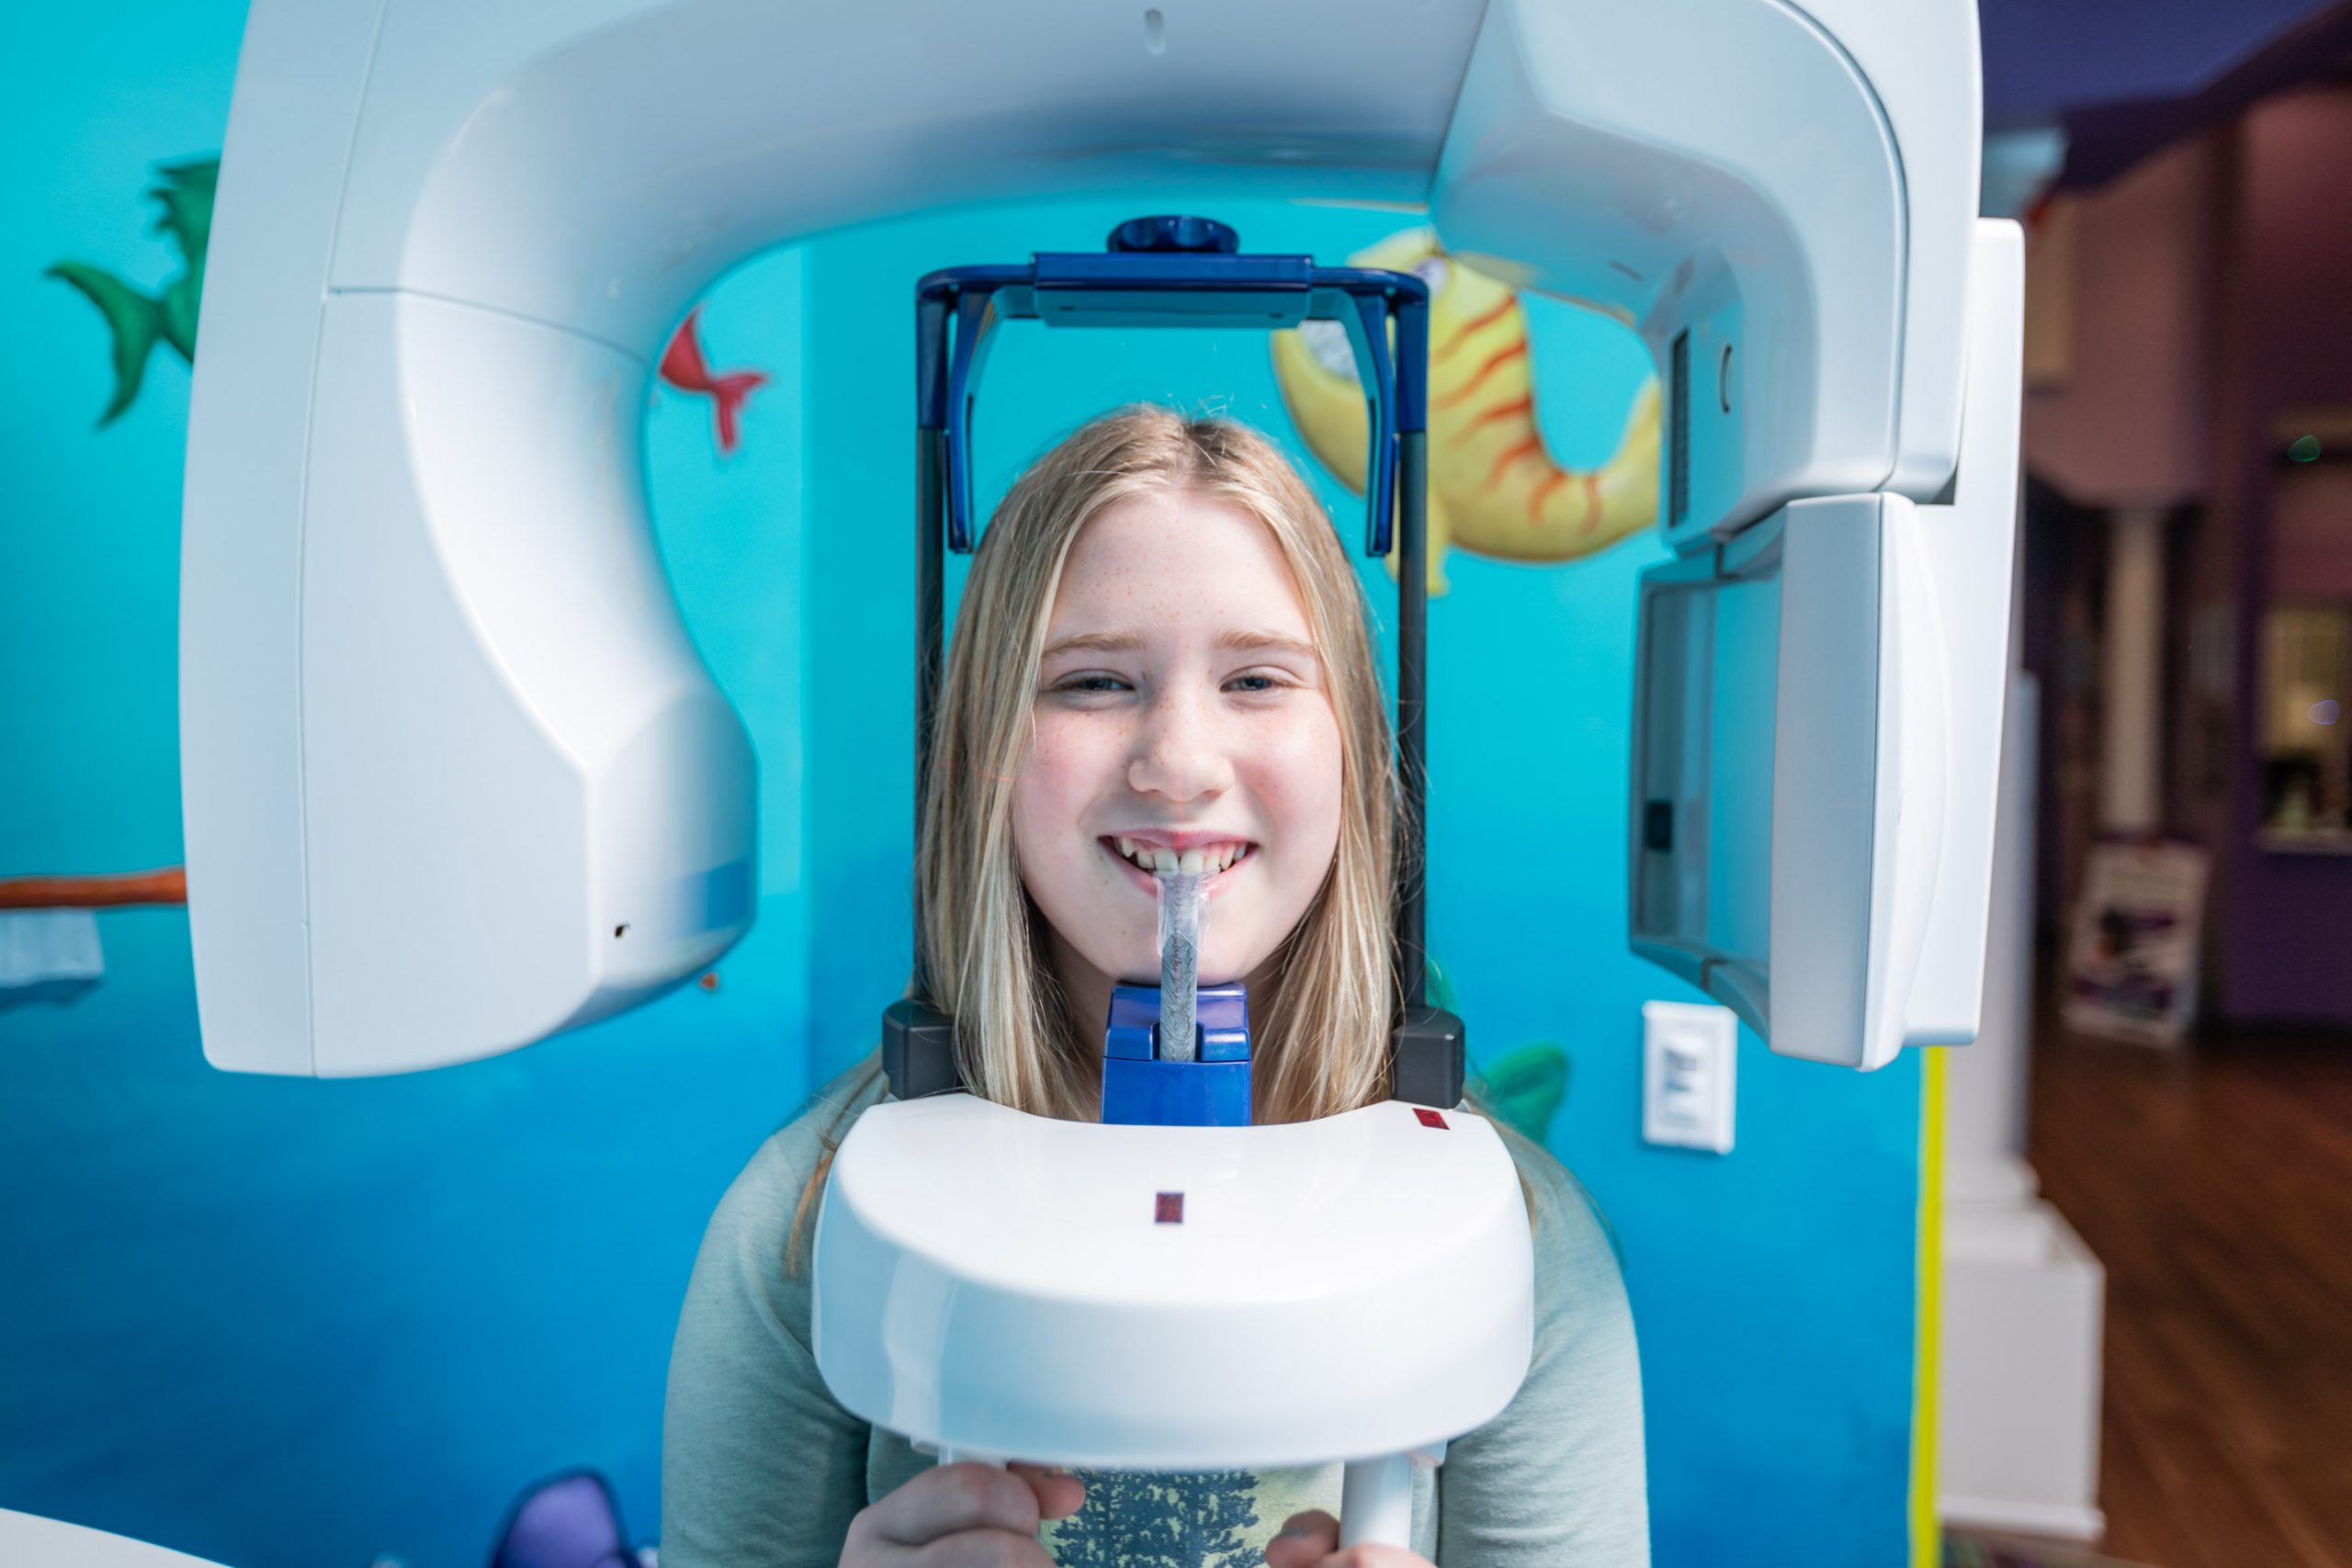  Young female child with blonde hair stands in a digital dental X-ray machine with sea-themed background.